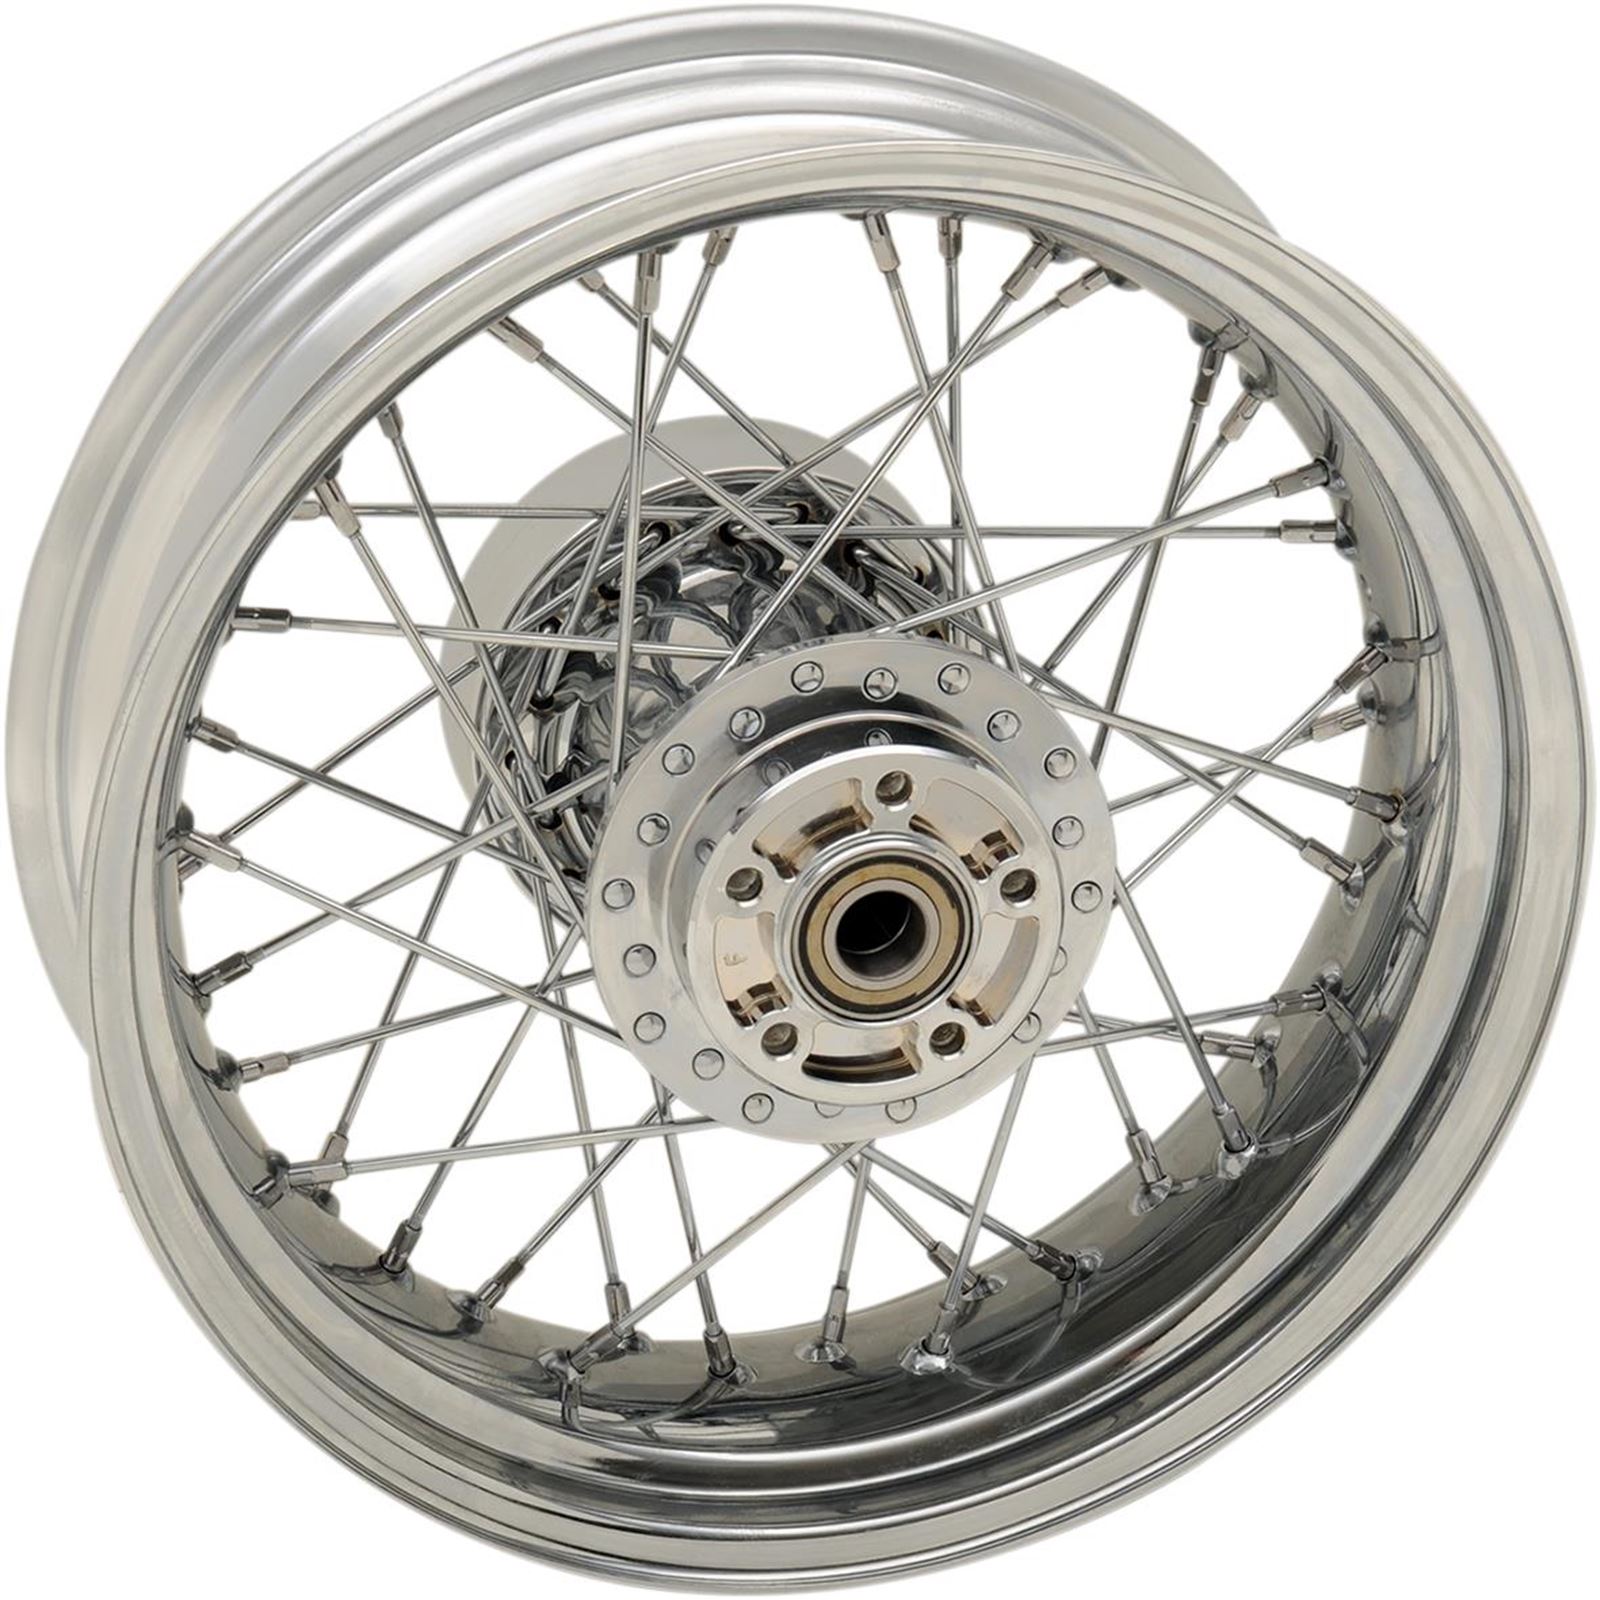 Drag Specialties Wheel Rear 16x5 09+ with ABS